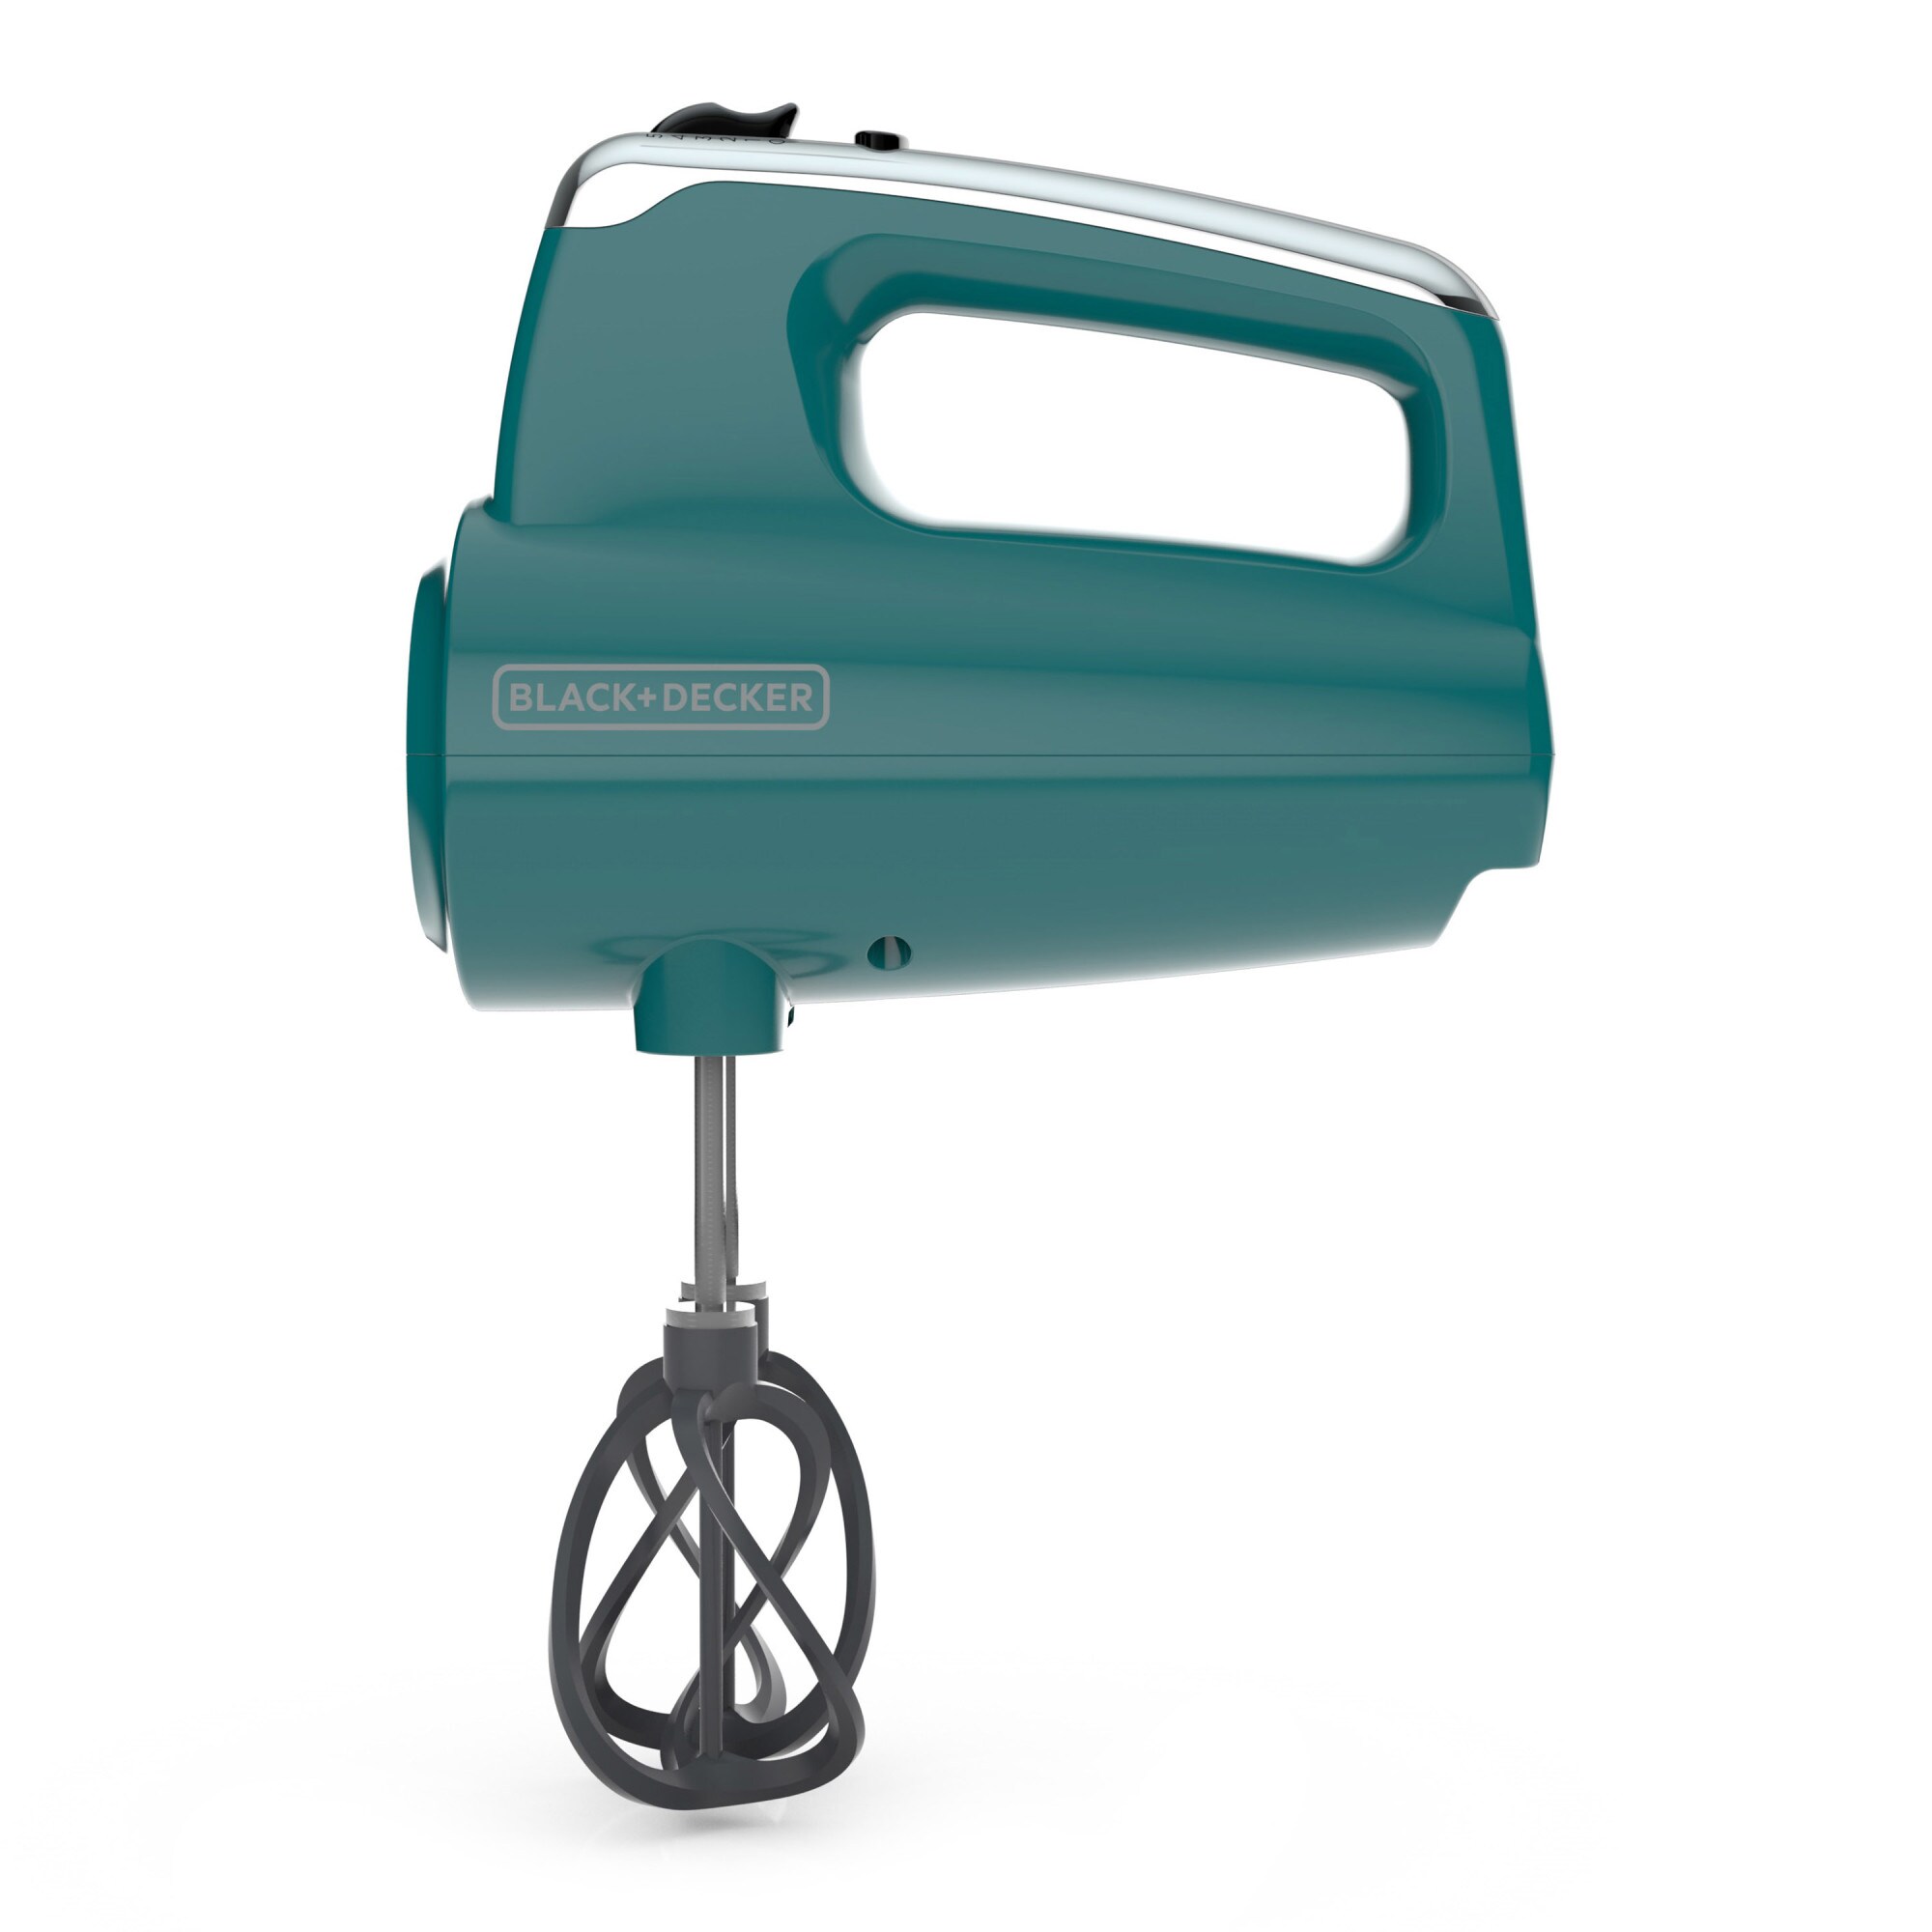 BLACK+DECKER Helix Performance Mixer 60-in Cord 5-Speed Teal Hand